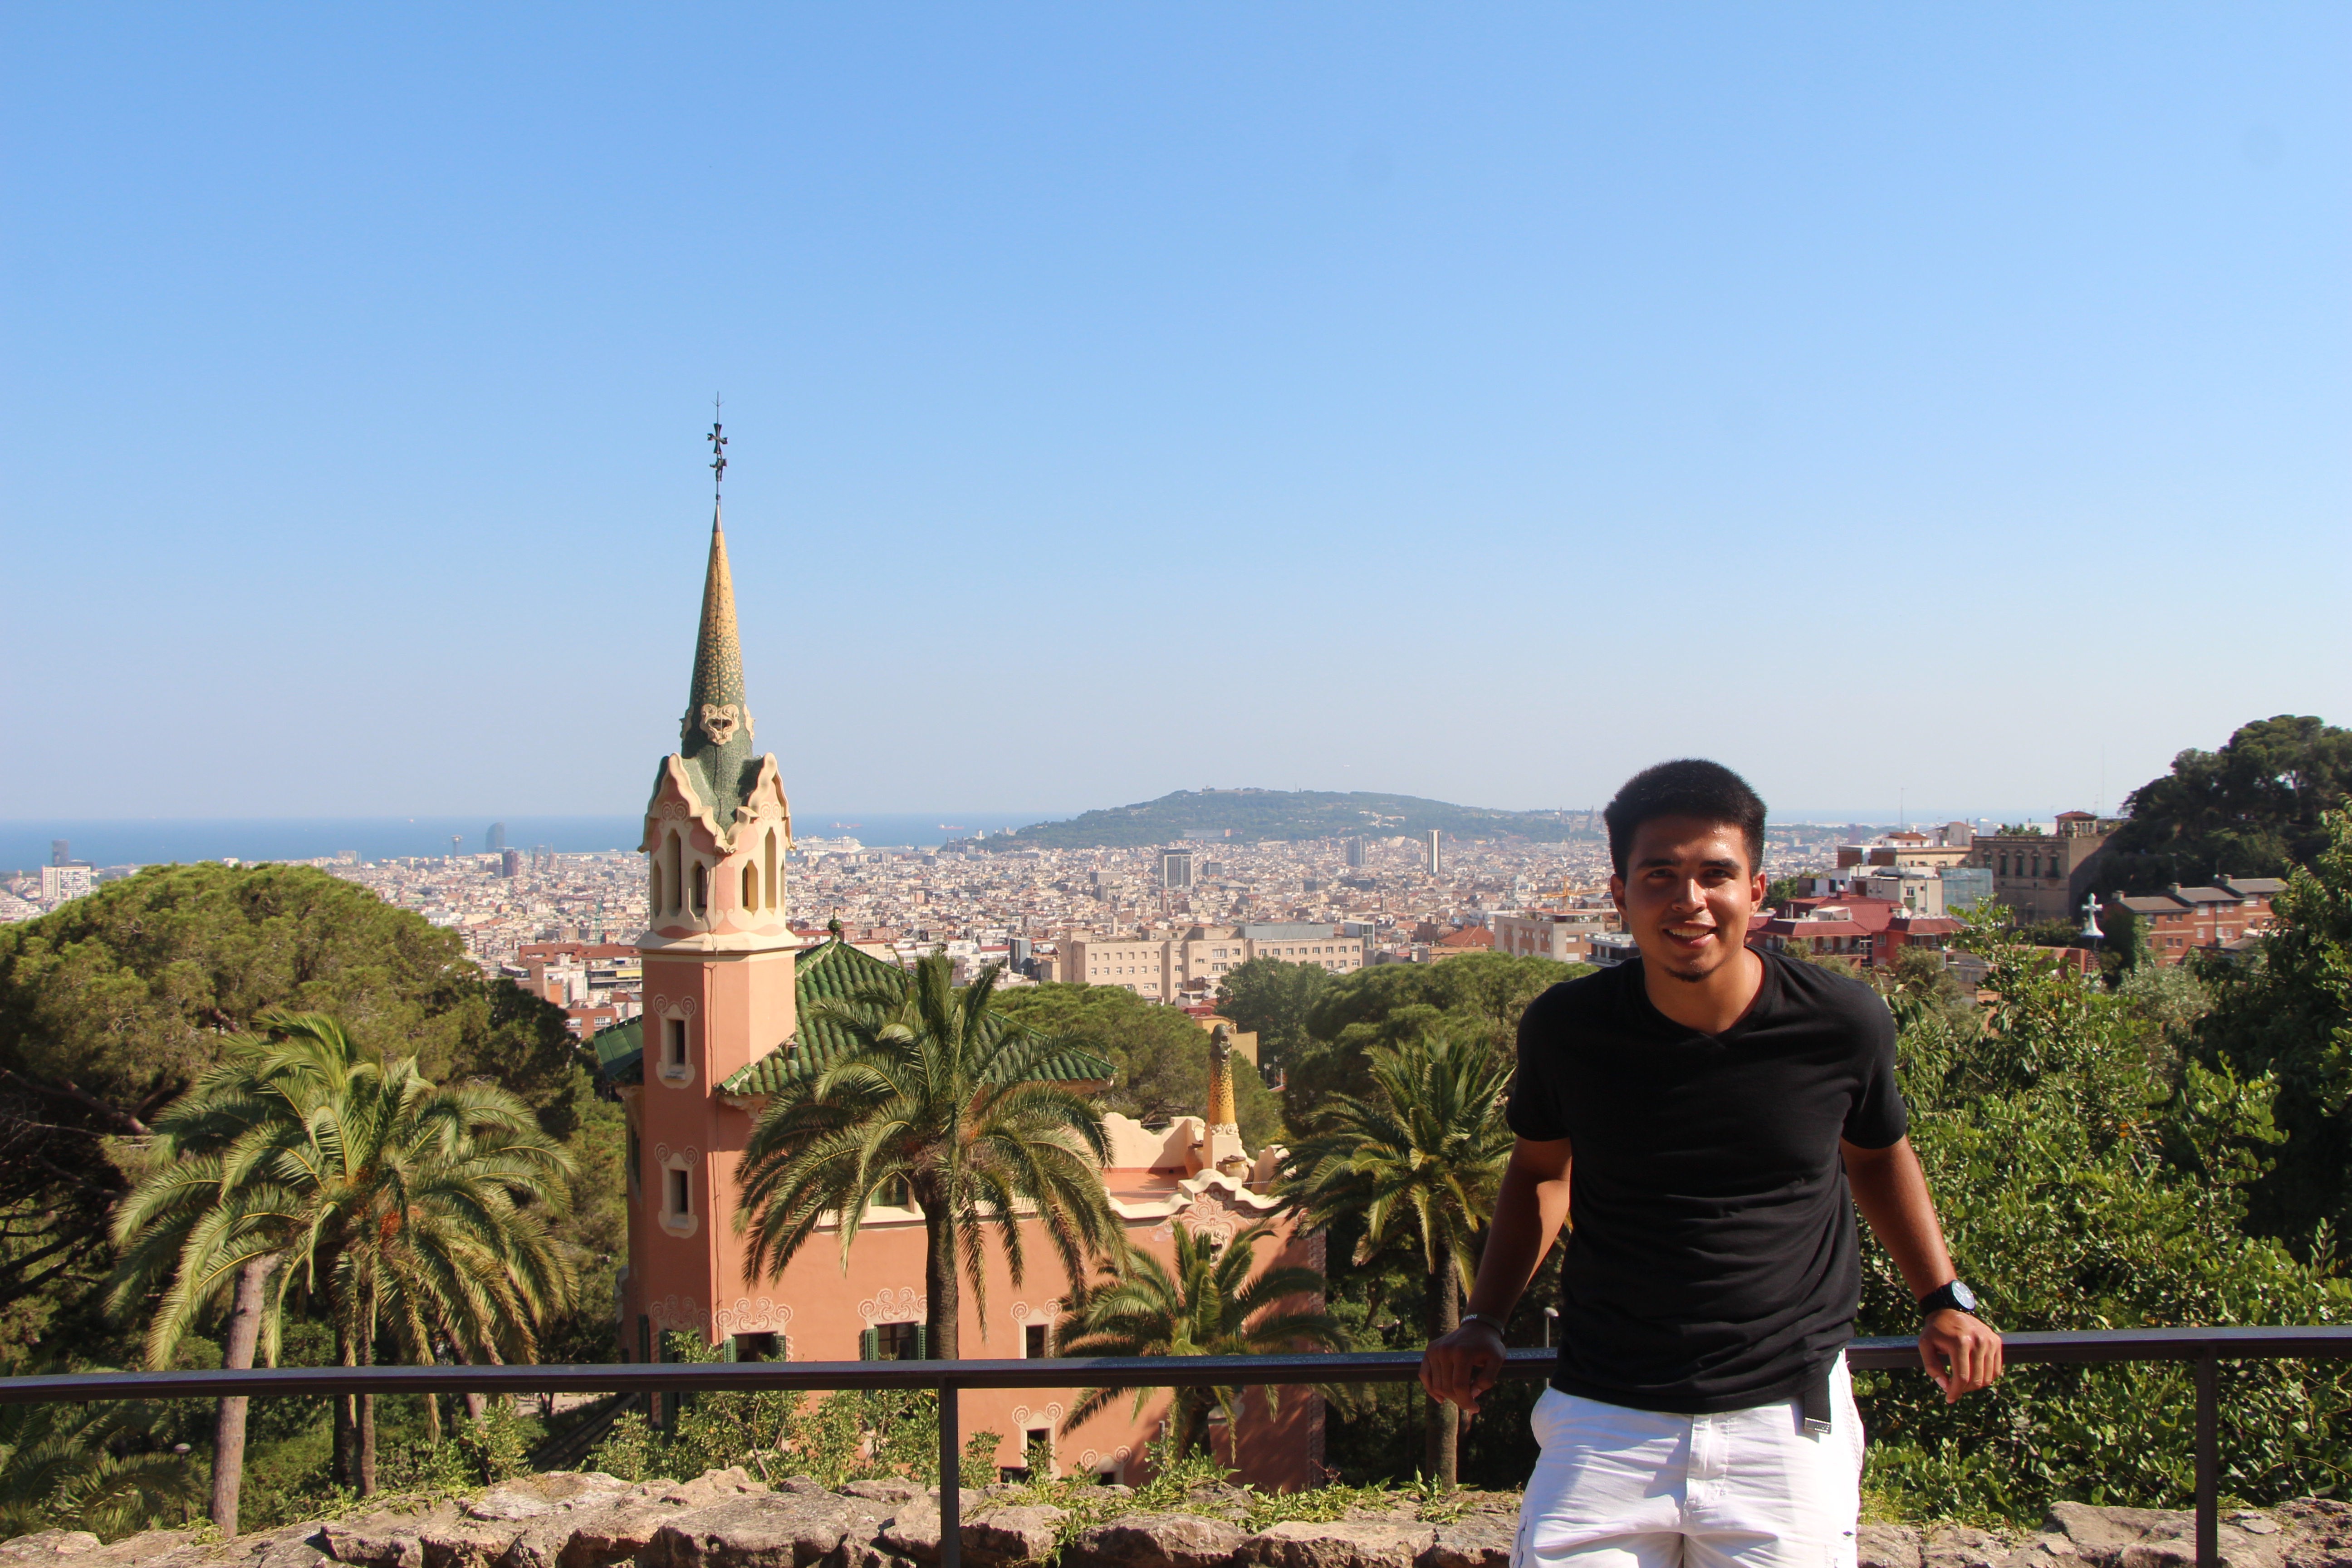 Student Rene Chavez leans against a metal railing while posing in front of a historic church in Park Guell, Barcelona, Spain. The sea and the city is in the background.